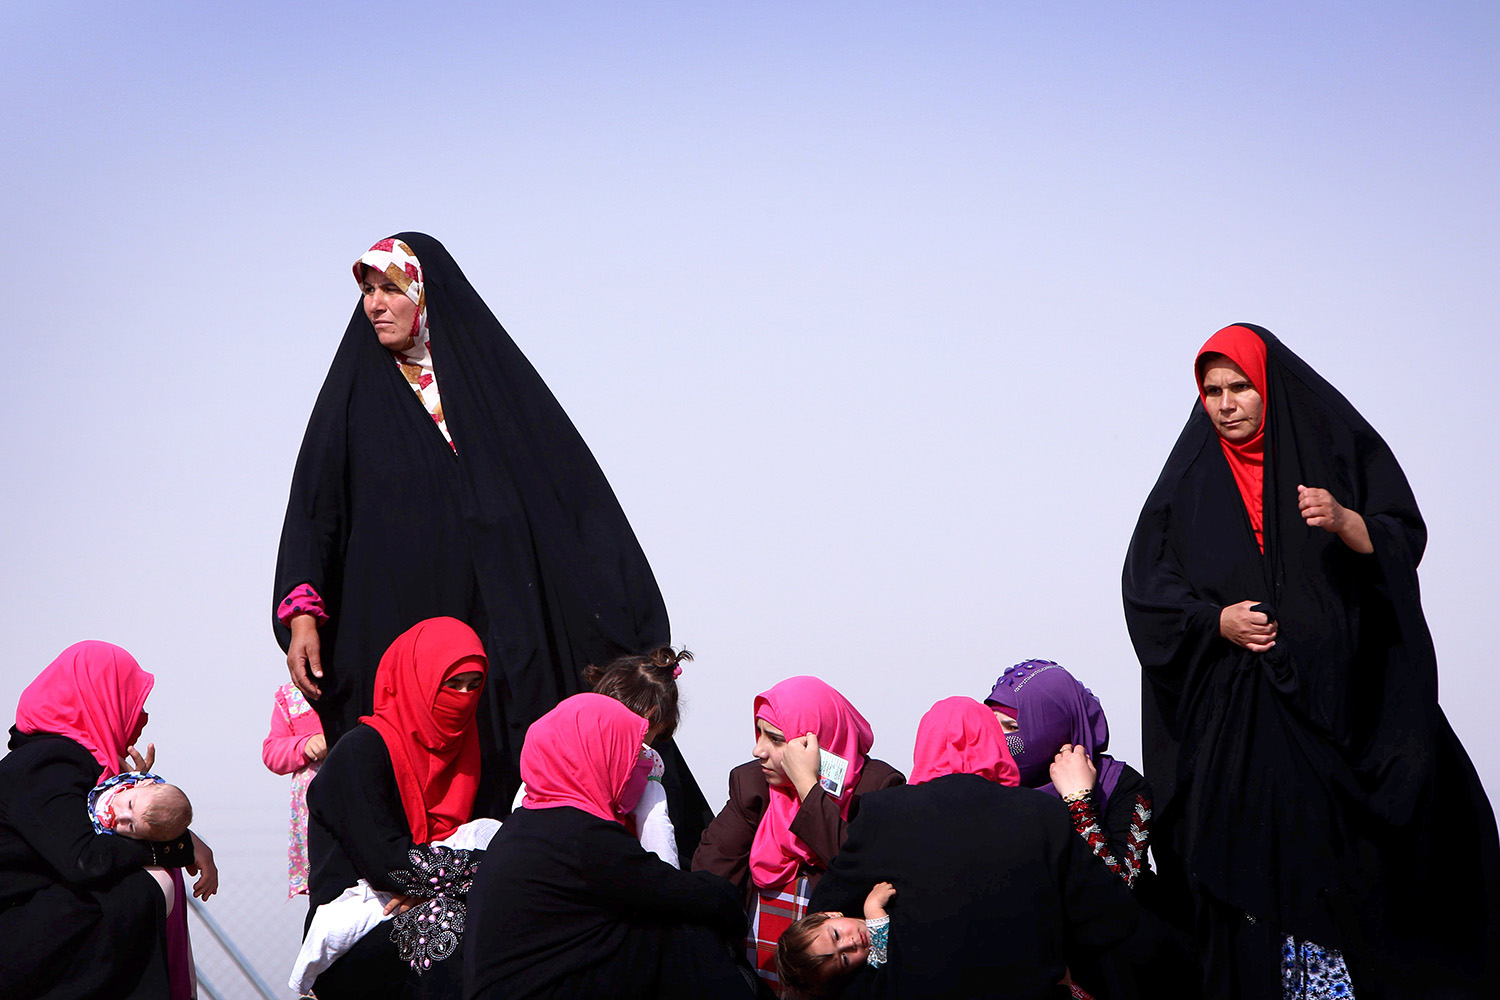 Iraqi women gather at a temporary camp set up to shelter civilians fleeing violence in northern Nineveh province in Aski Kalak, 25 miles west of Erbil, on June 13.